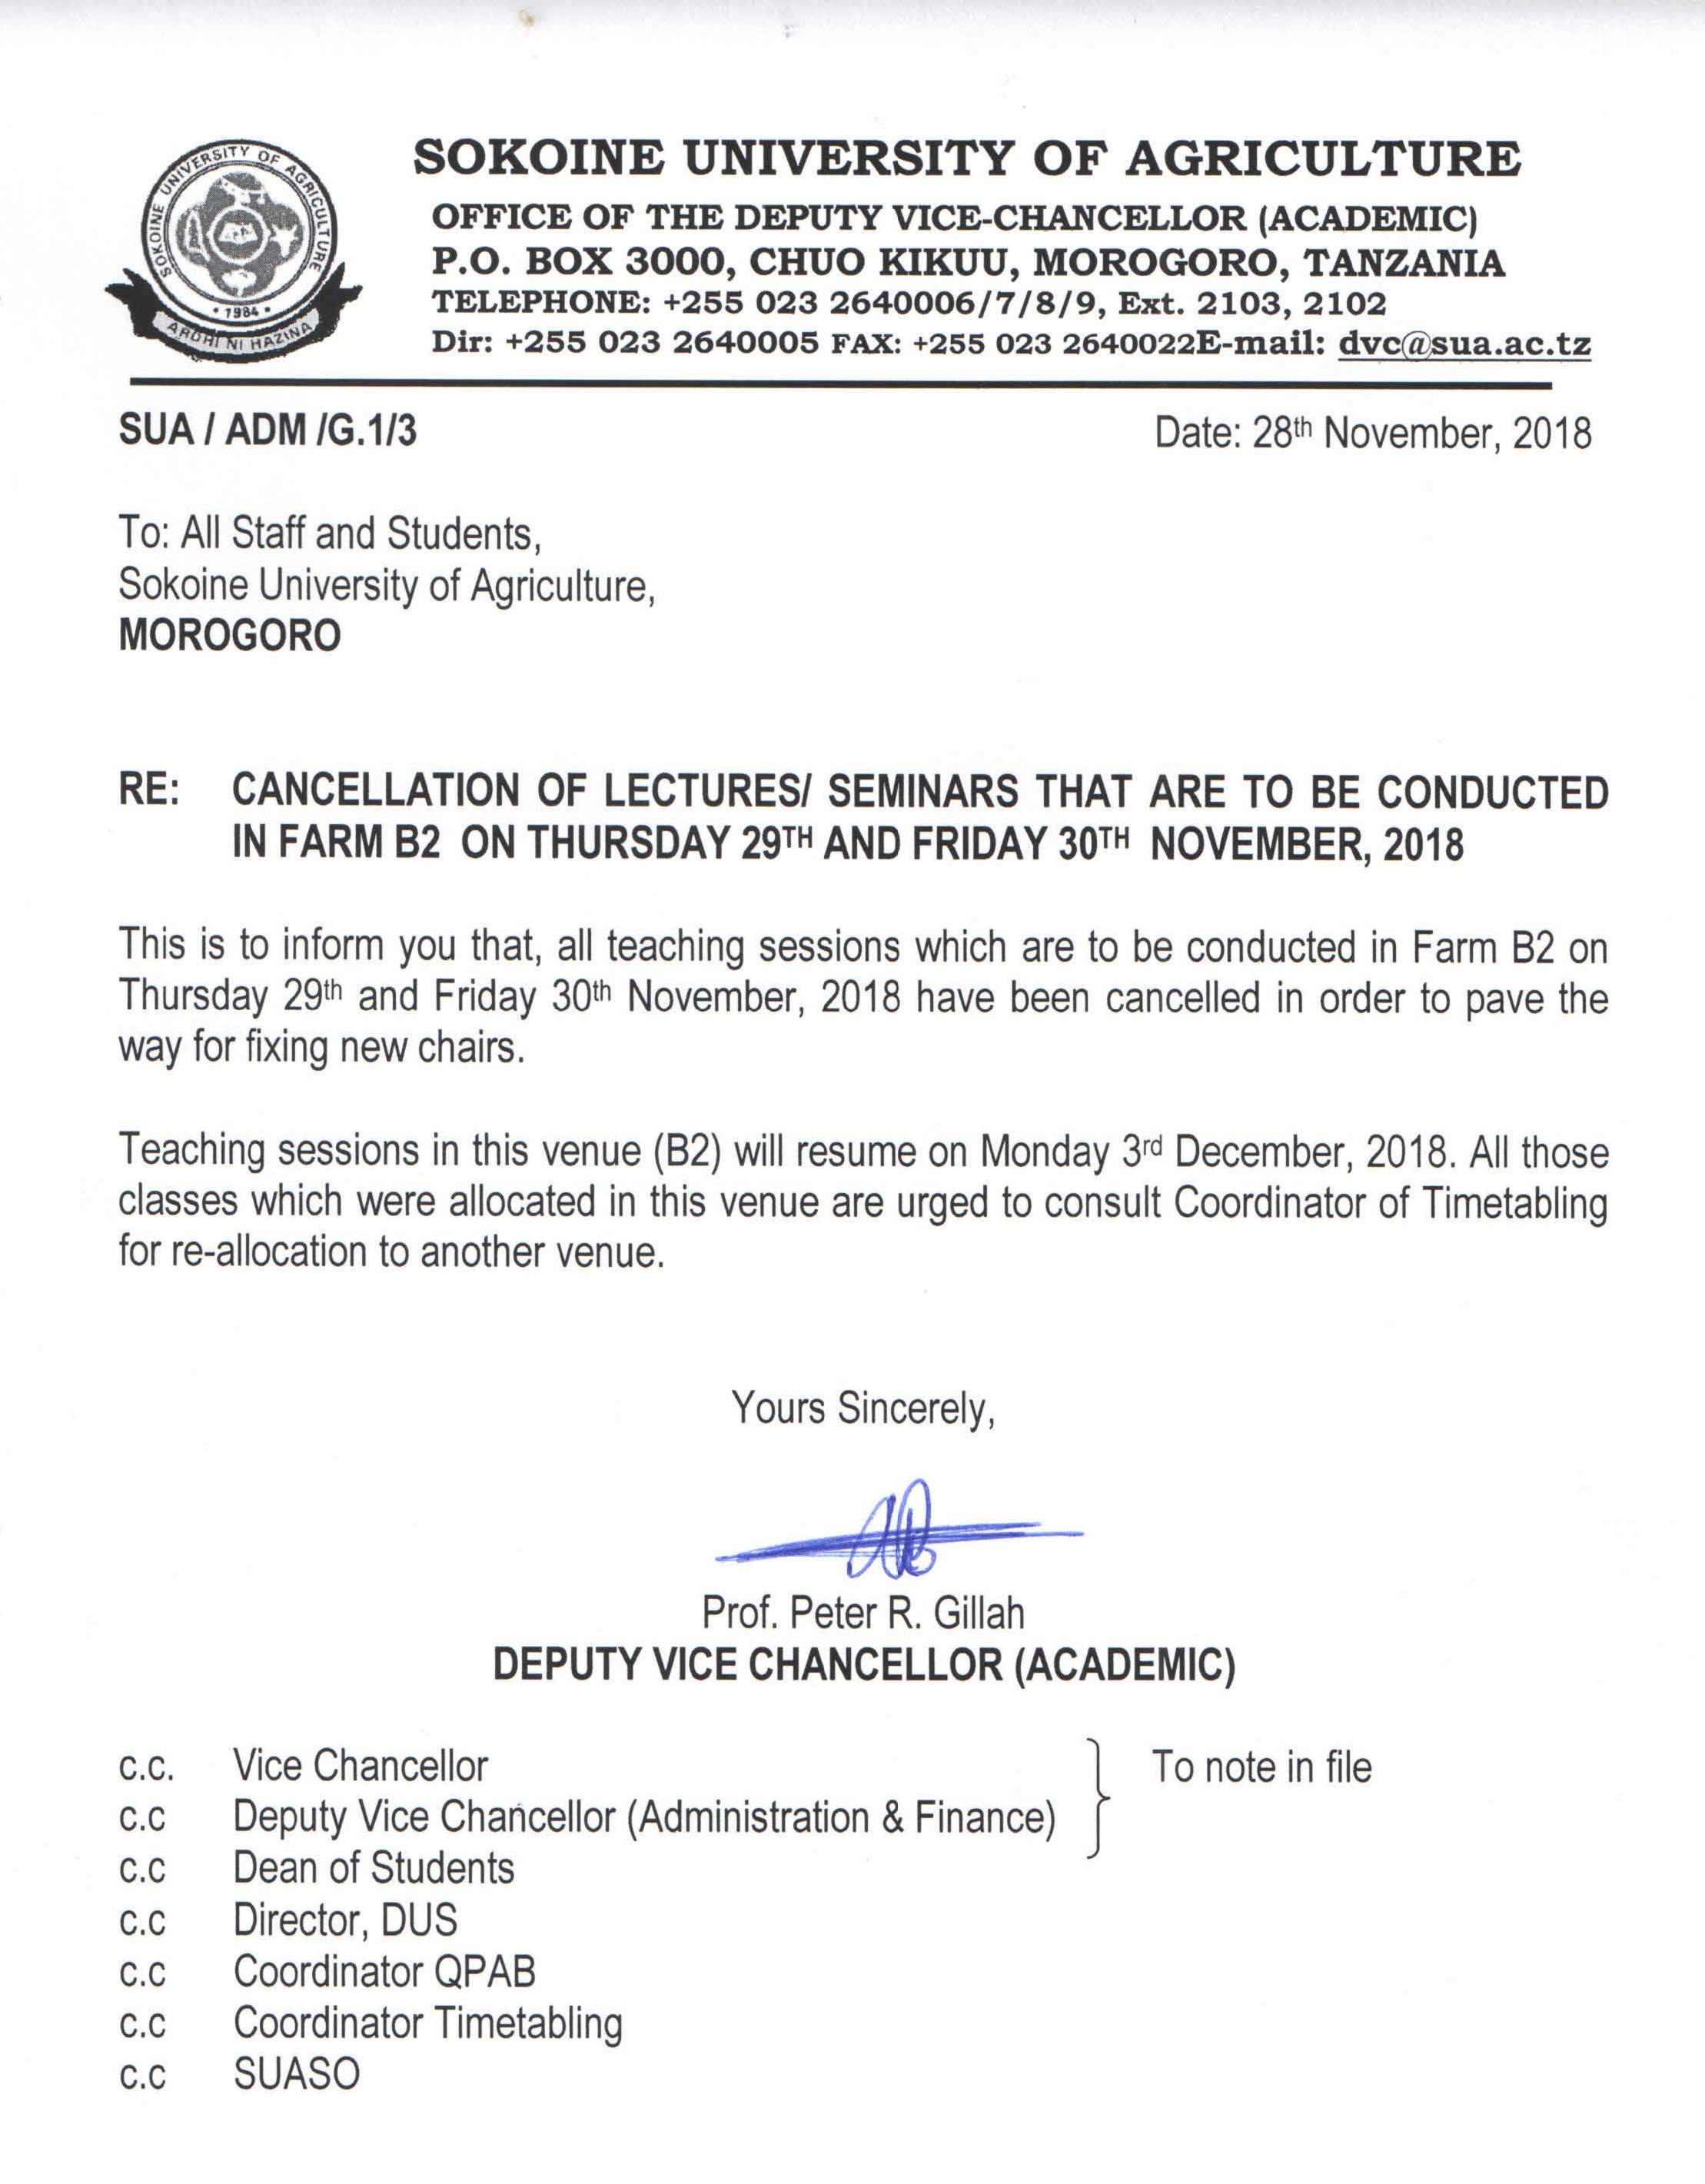 Cancellation of lectures